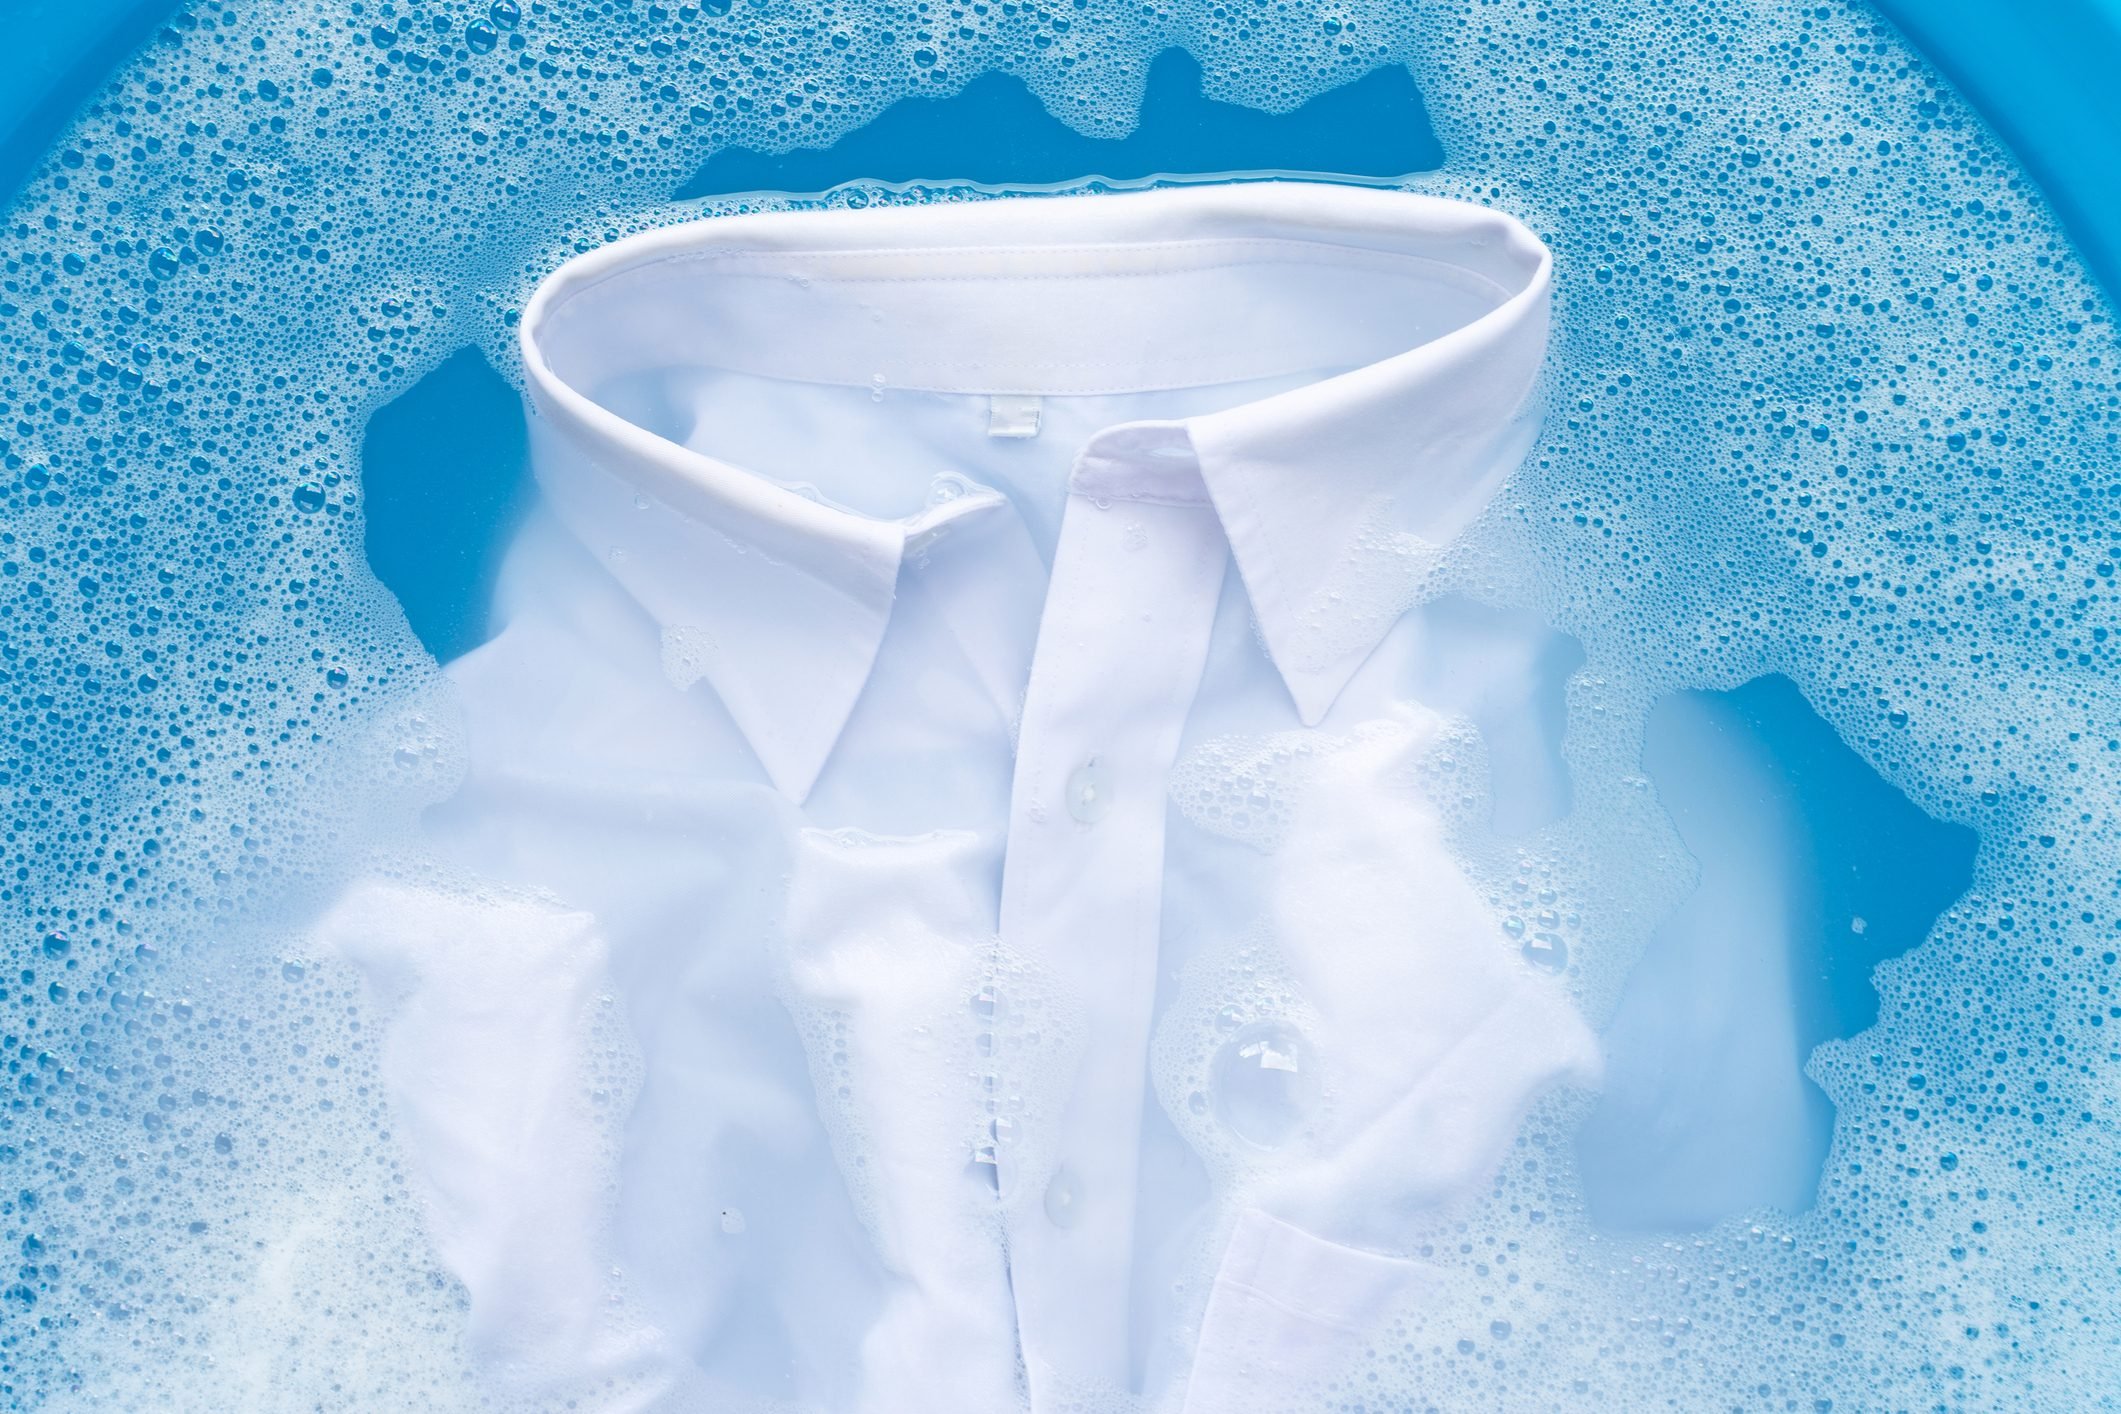 Laundry bluing can brighten your whites—here's how to use it